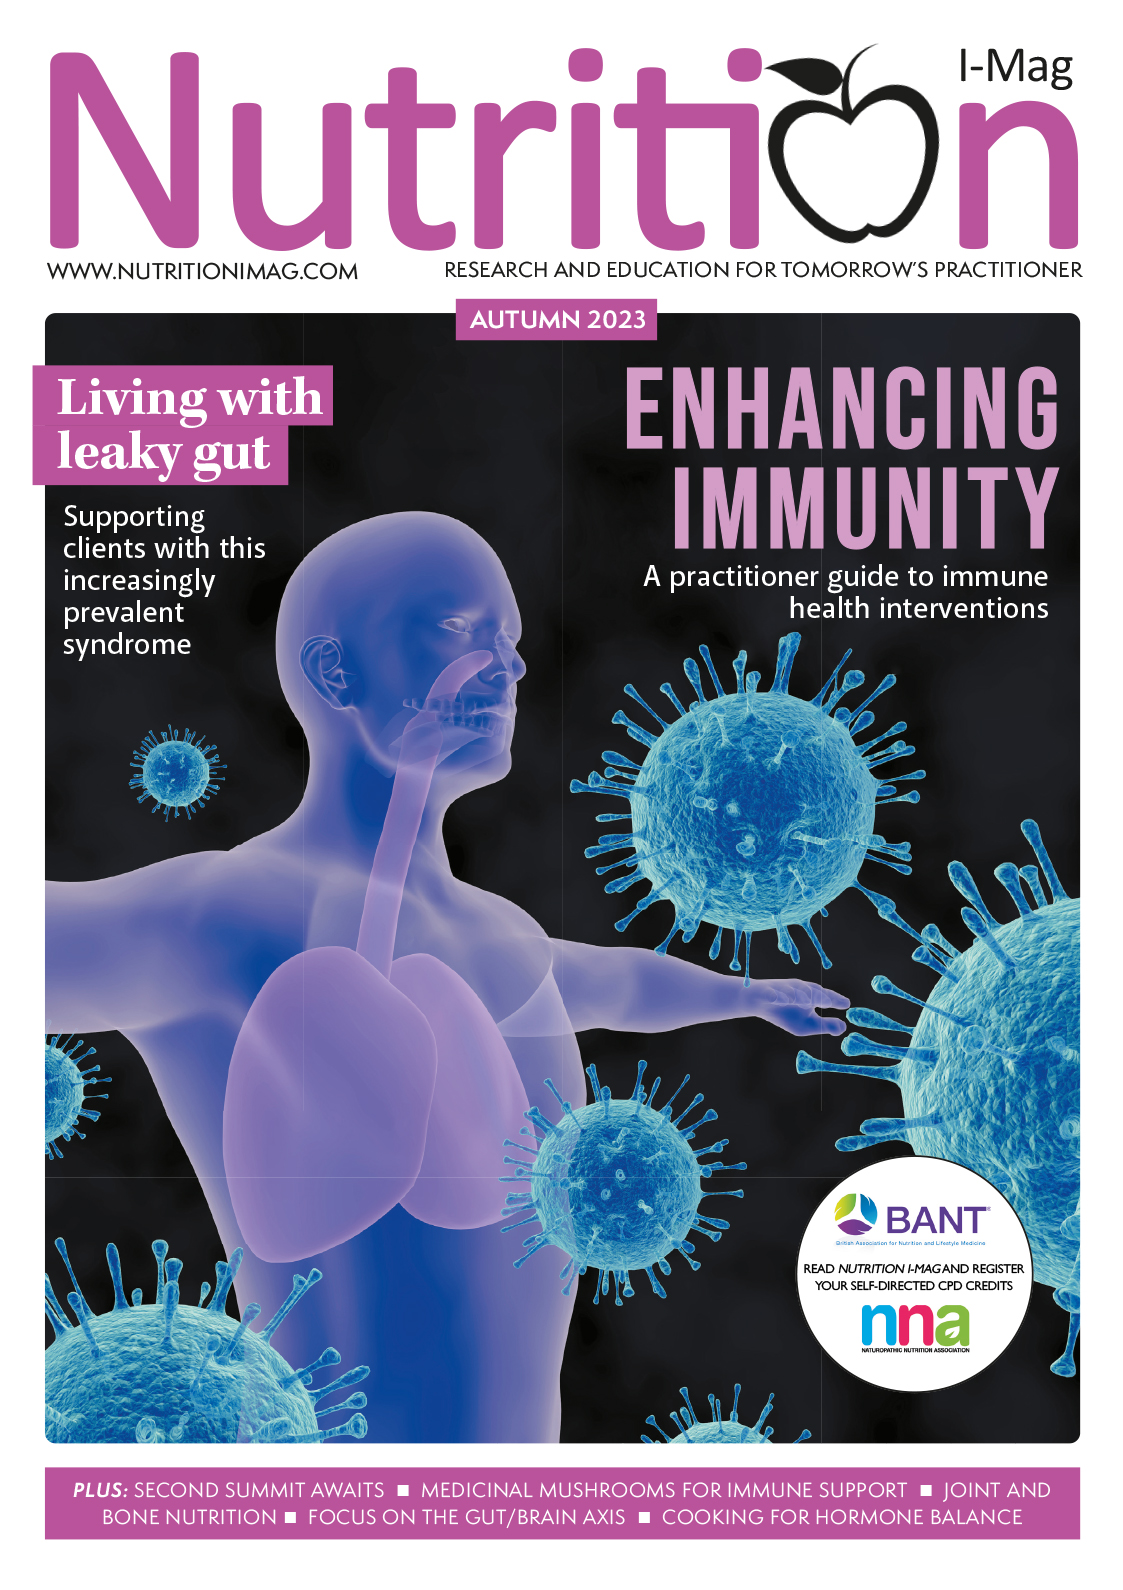 Nutrition I-Mag cover